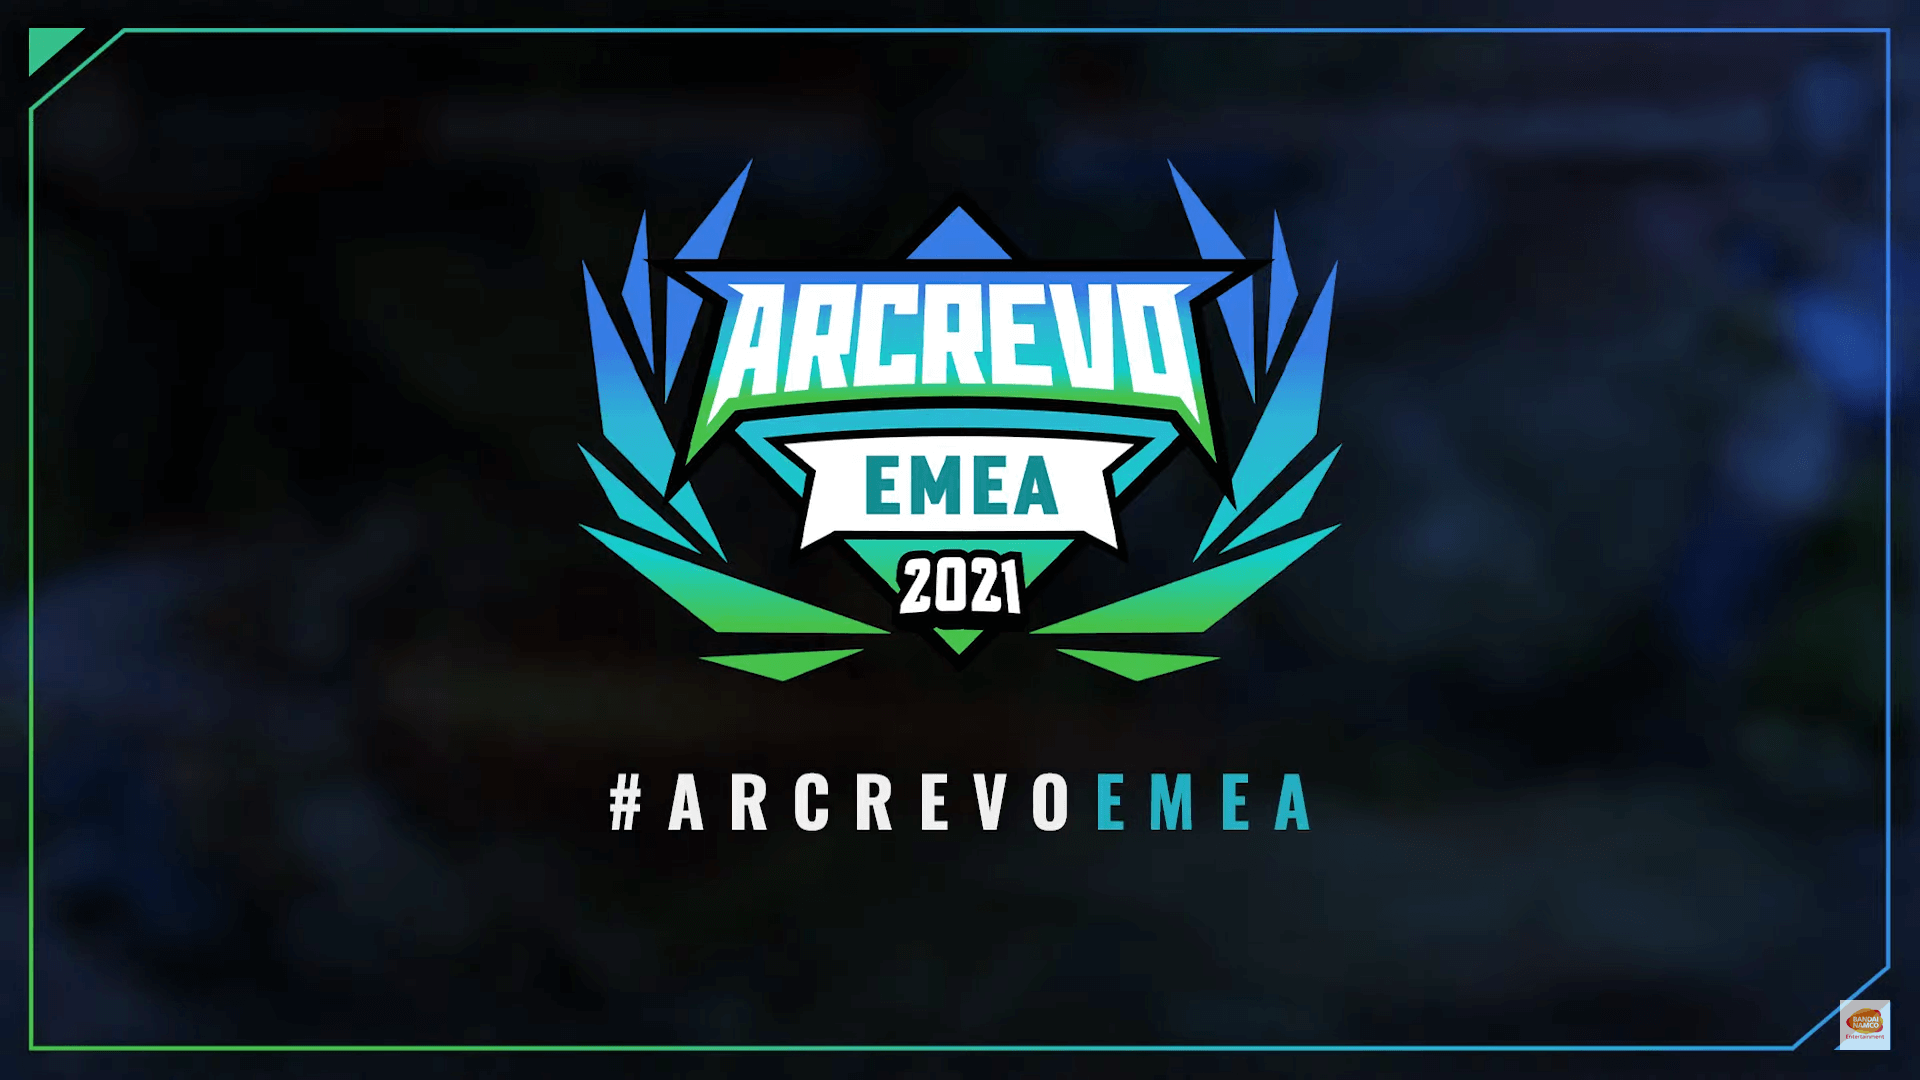 The Last Qualifier of ARCREVO EMEA (+ Results of All The Others)